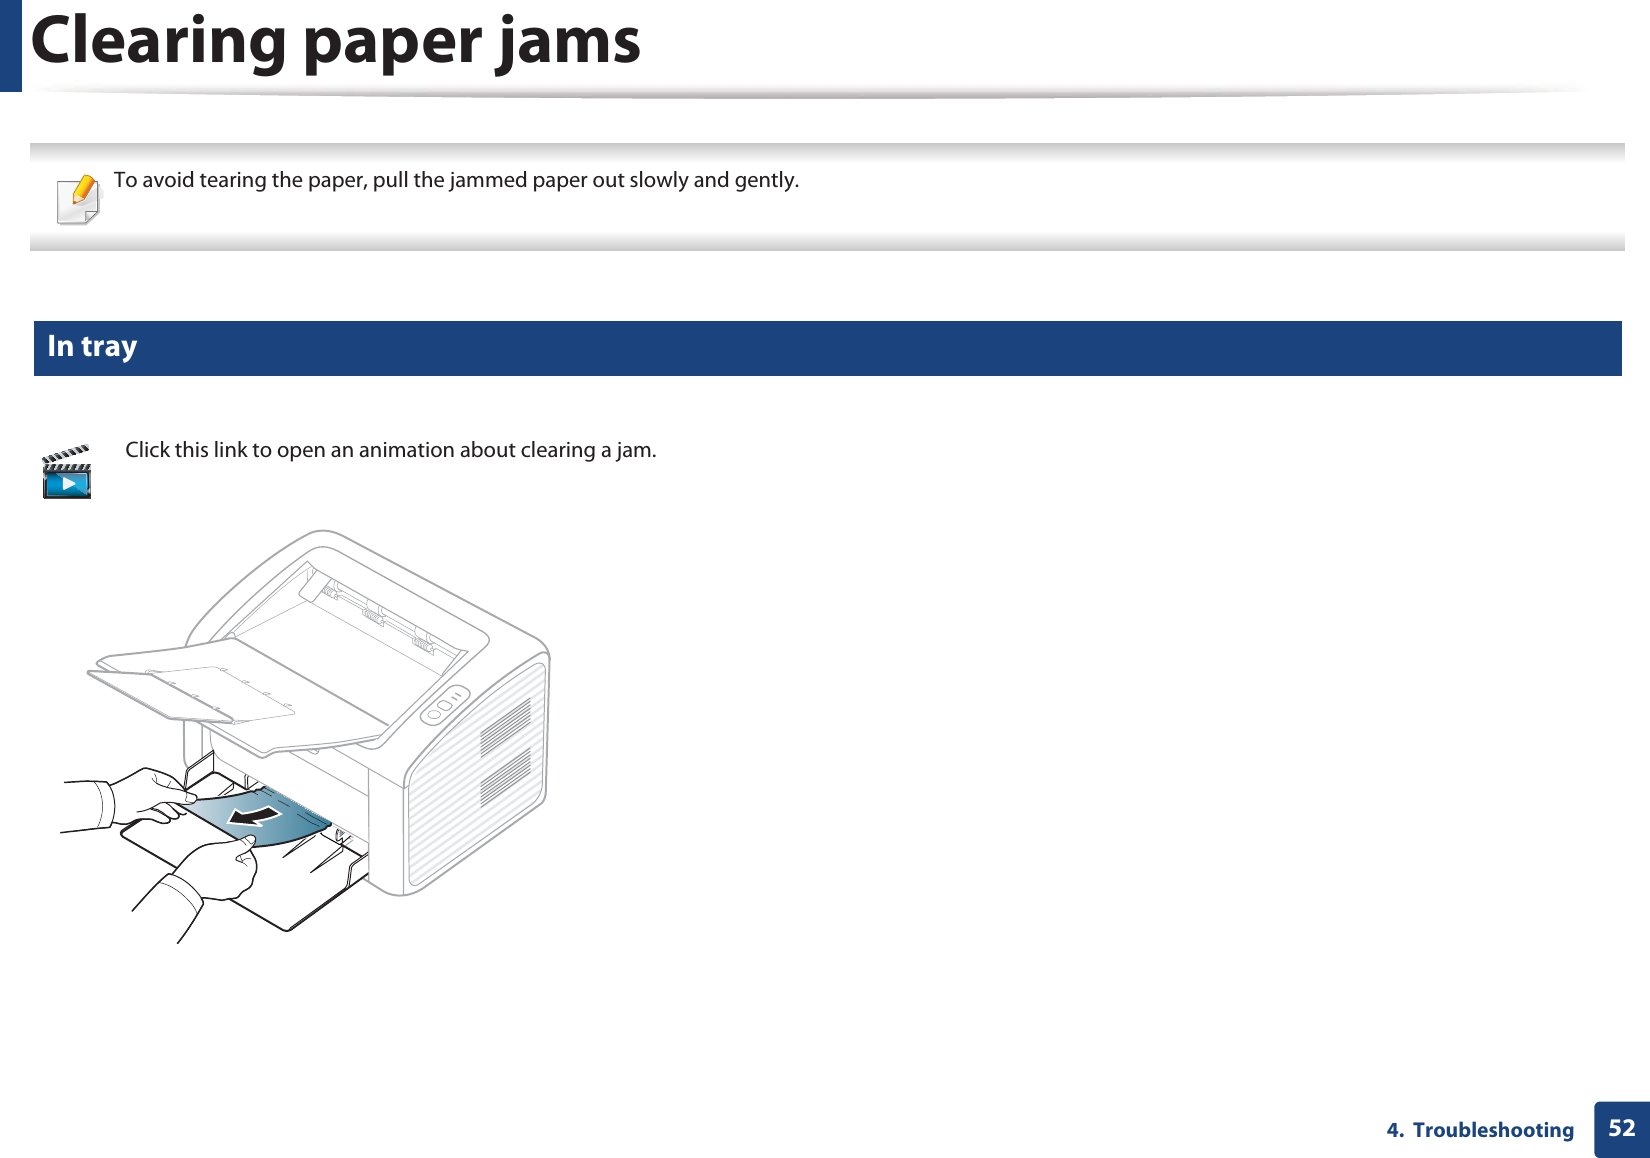 524.  TroubleshootingClearing paper jams To avoid tearing the paper, pull the jammed paper out slowly and gently.  1 In trayClick this link to open an animation about clearing a jam.